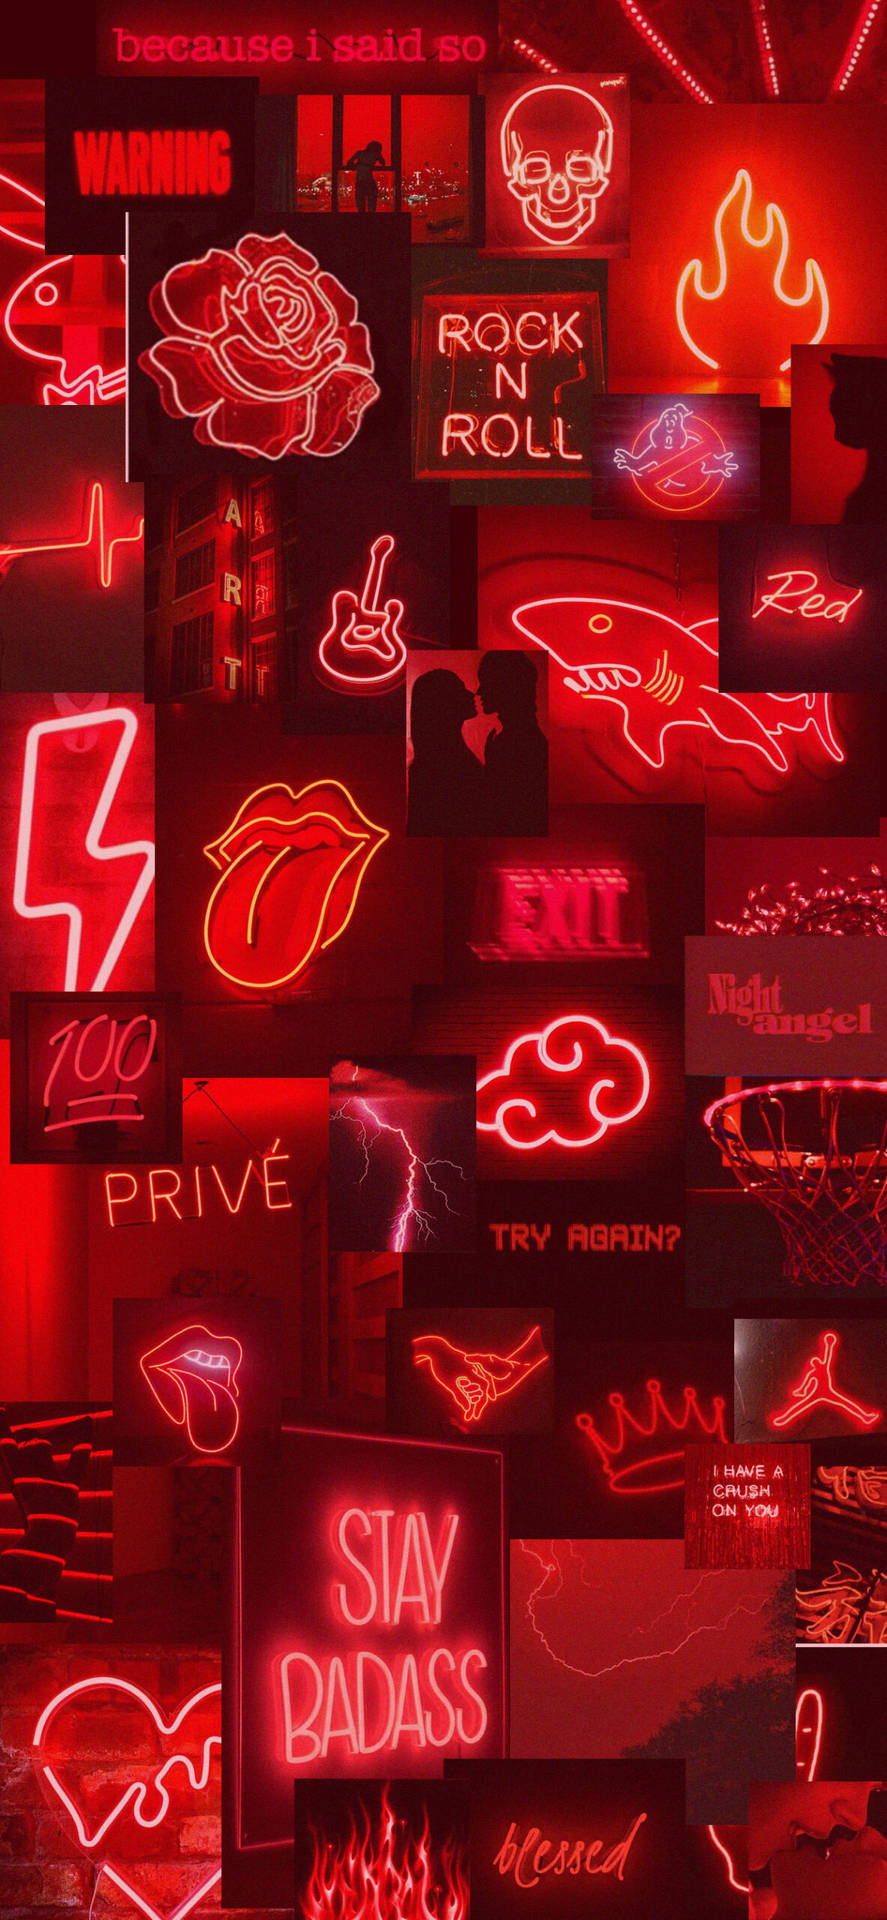 Cool Signages In Red Aesthetic Iphone Wallpaper